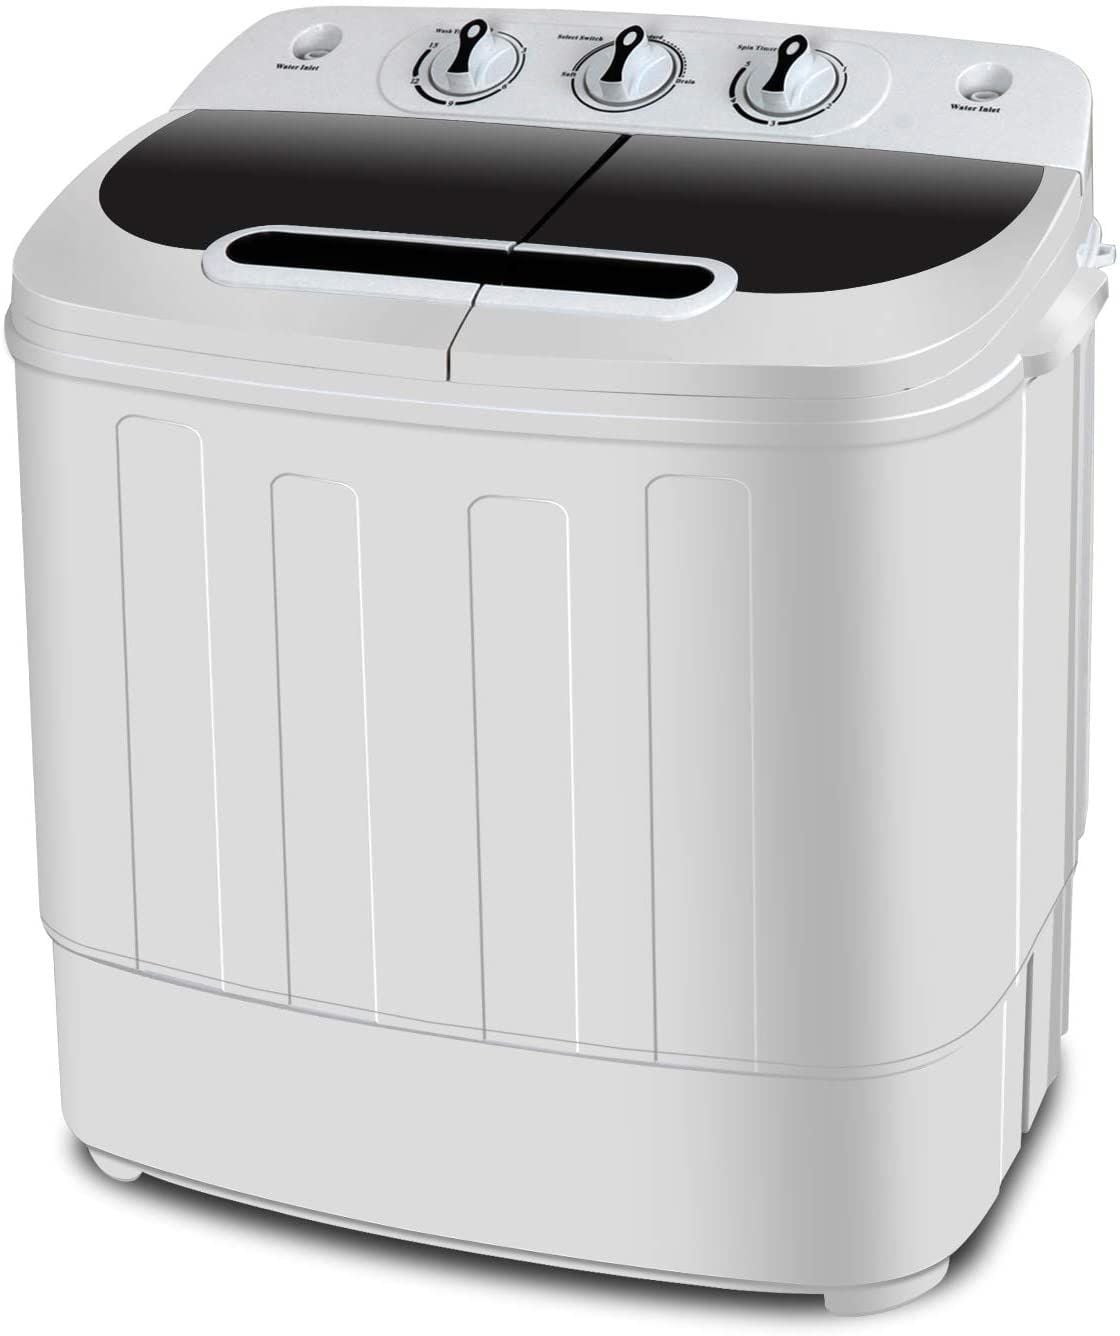 Full view of Amazon's Super Deal Portable Washer-Dryer